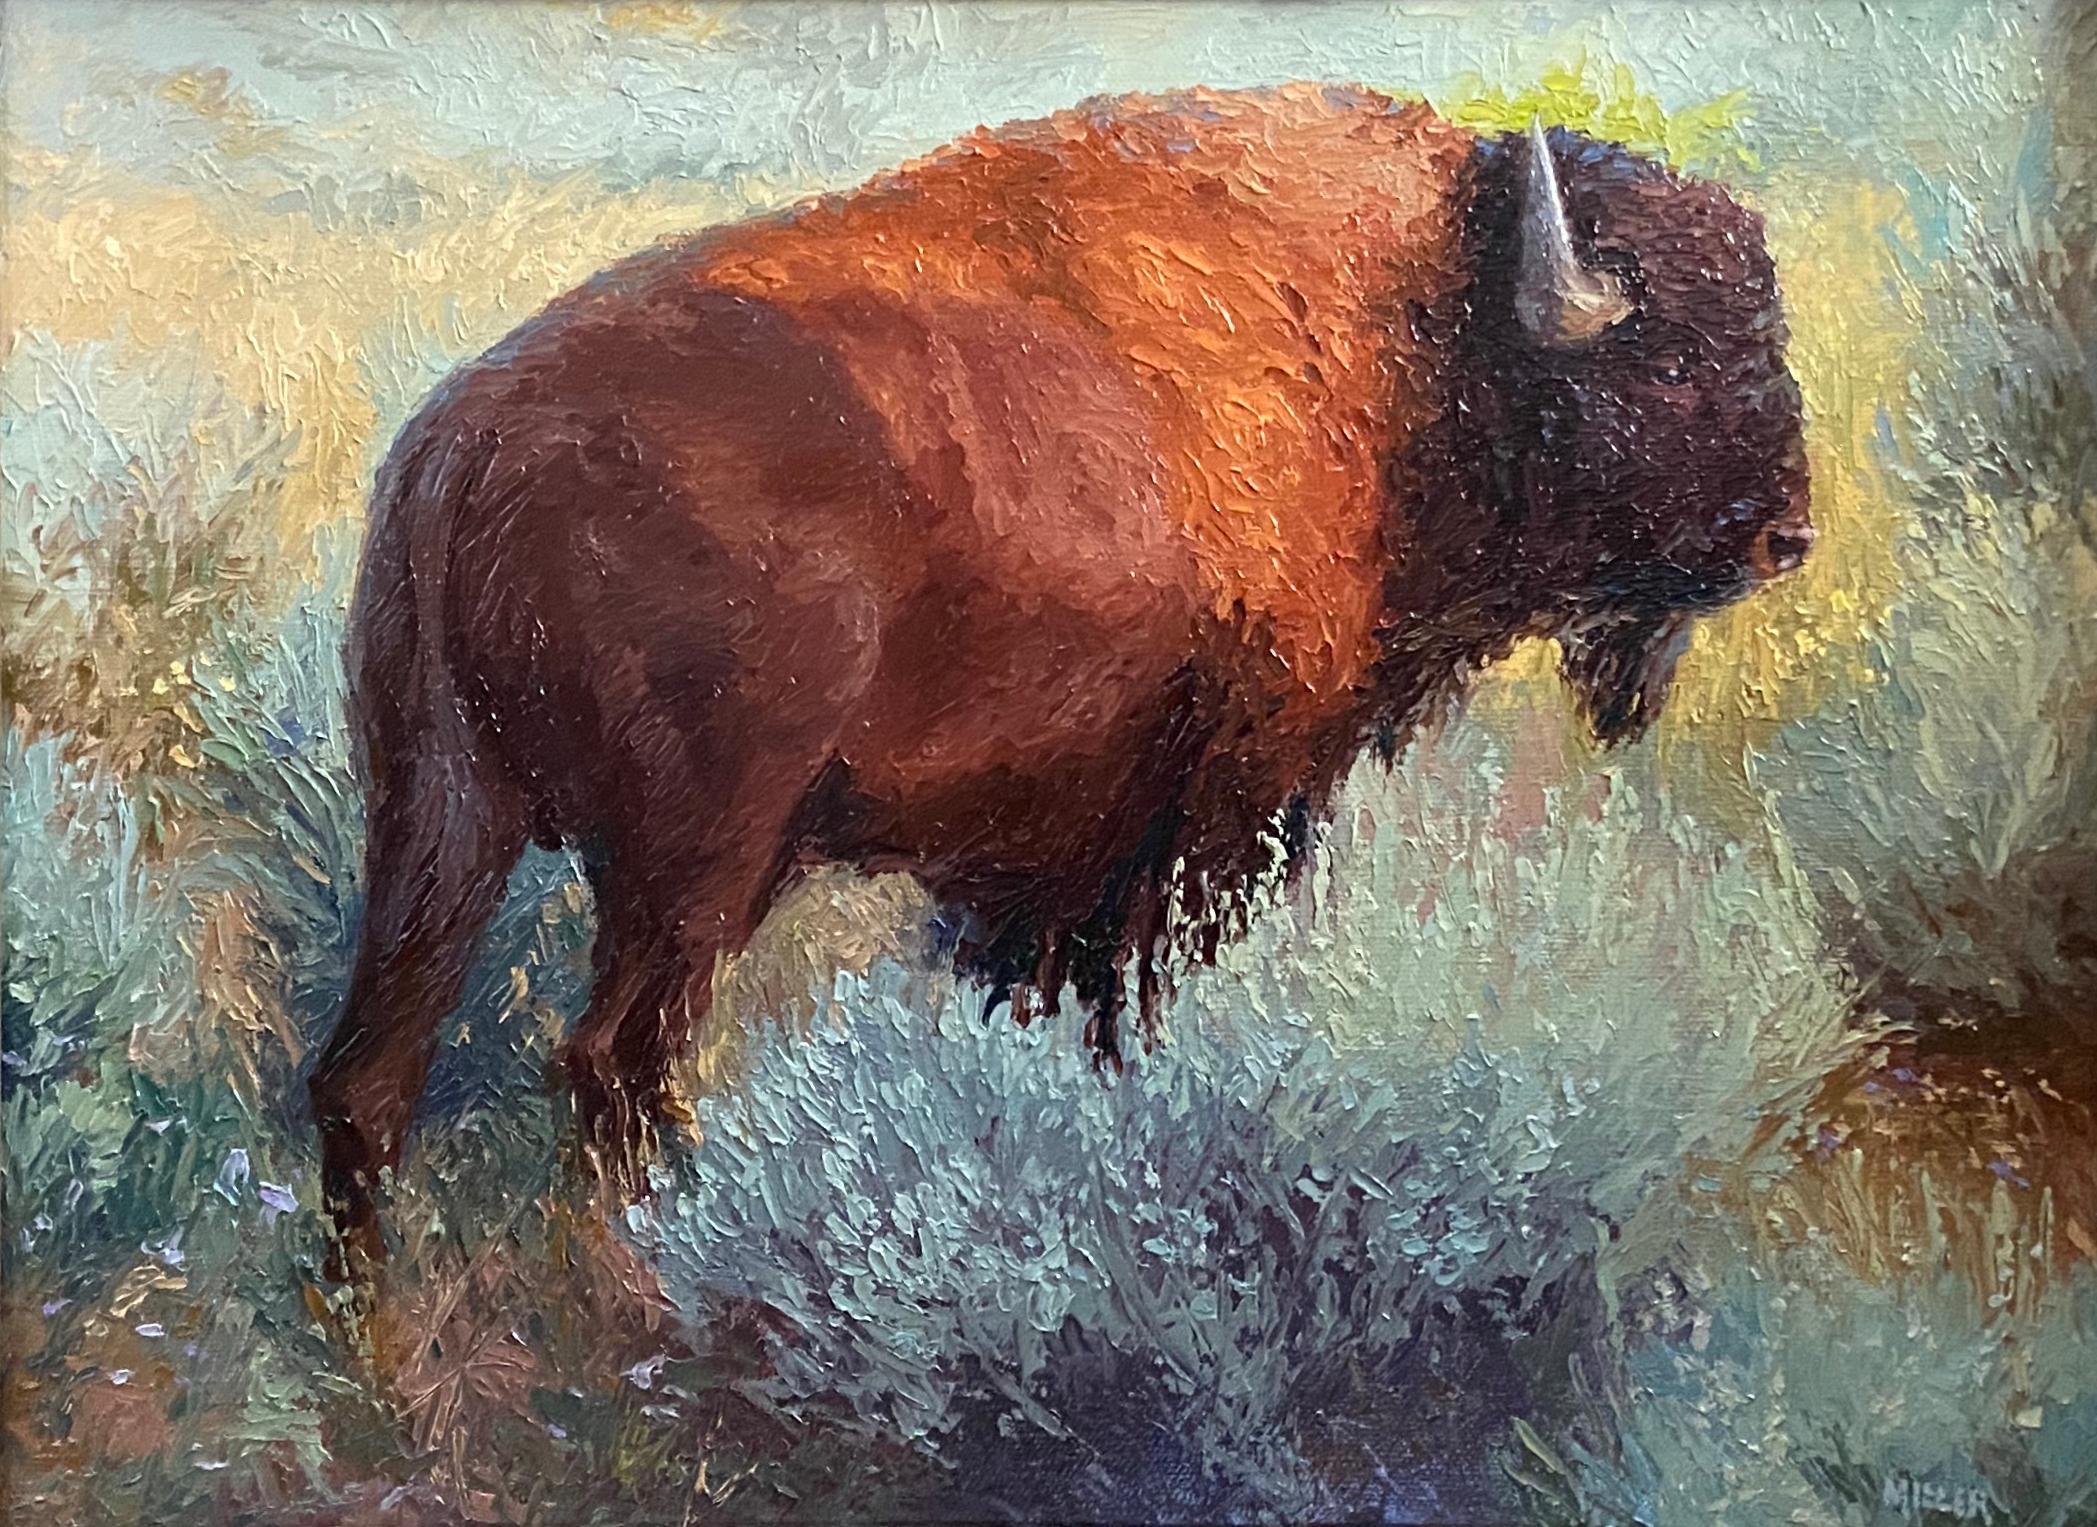 The Boss (American Bison) - Painting by Gary Miller